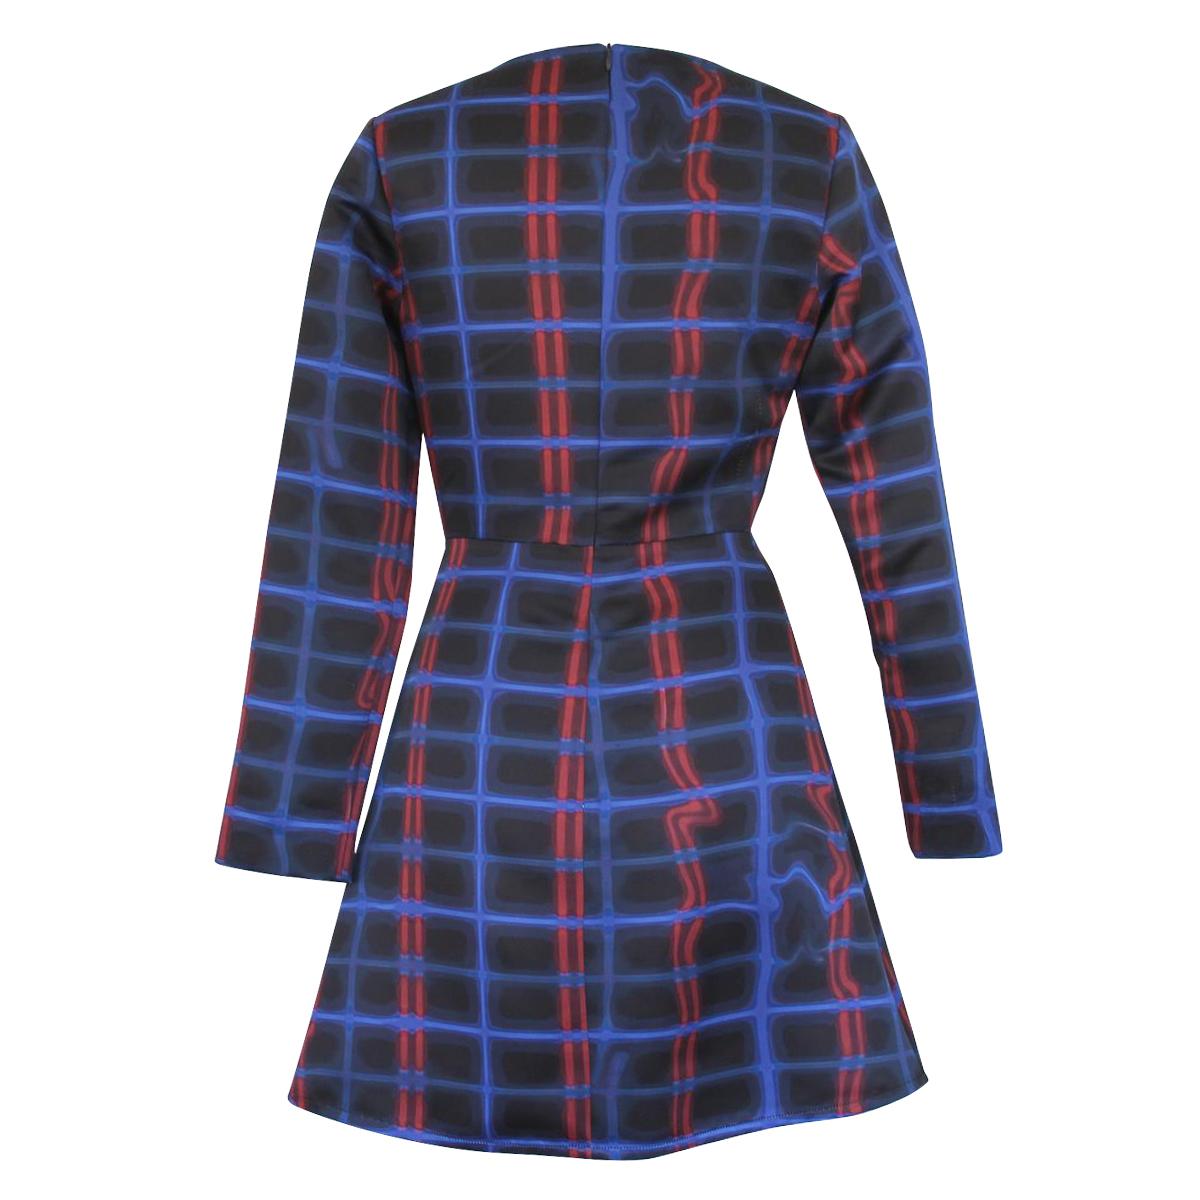 Very chic Kenzo dress
Viscose (77%) Virgin wool (21%) Elasthane
Blue color
Square fancy
Long sleeves
Total length cm 85 (33.4 inches)
Shoulders cm 37 (14.5 inches)
Worldwide express shipping included in the price !